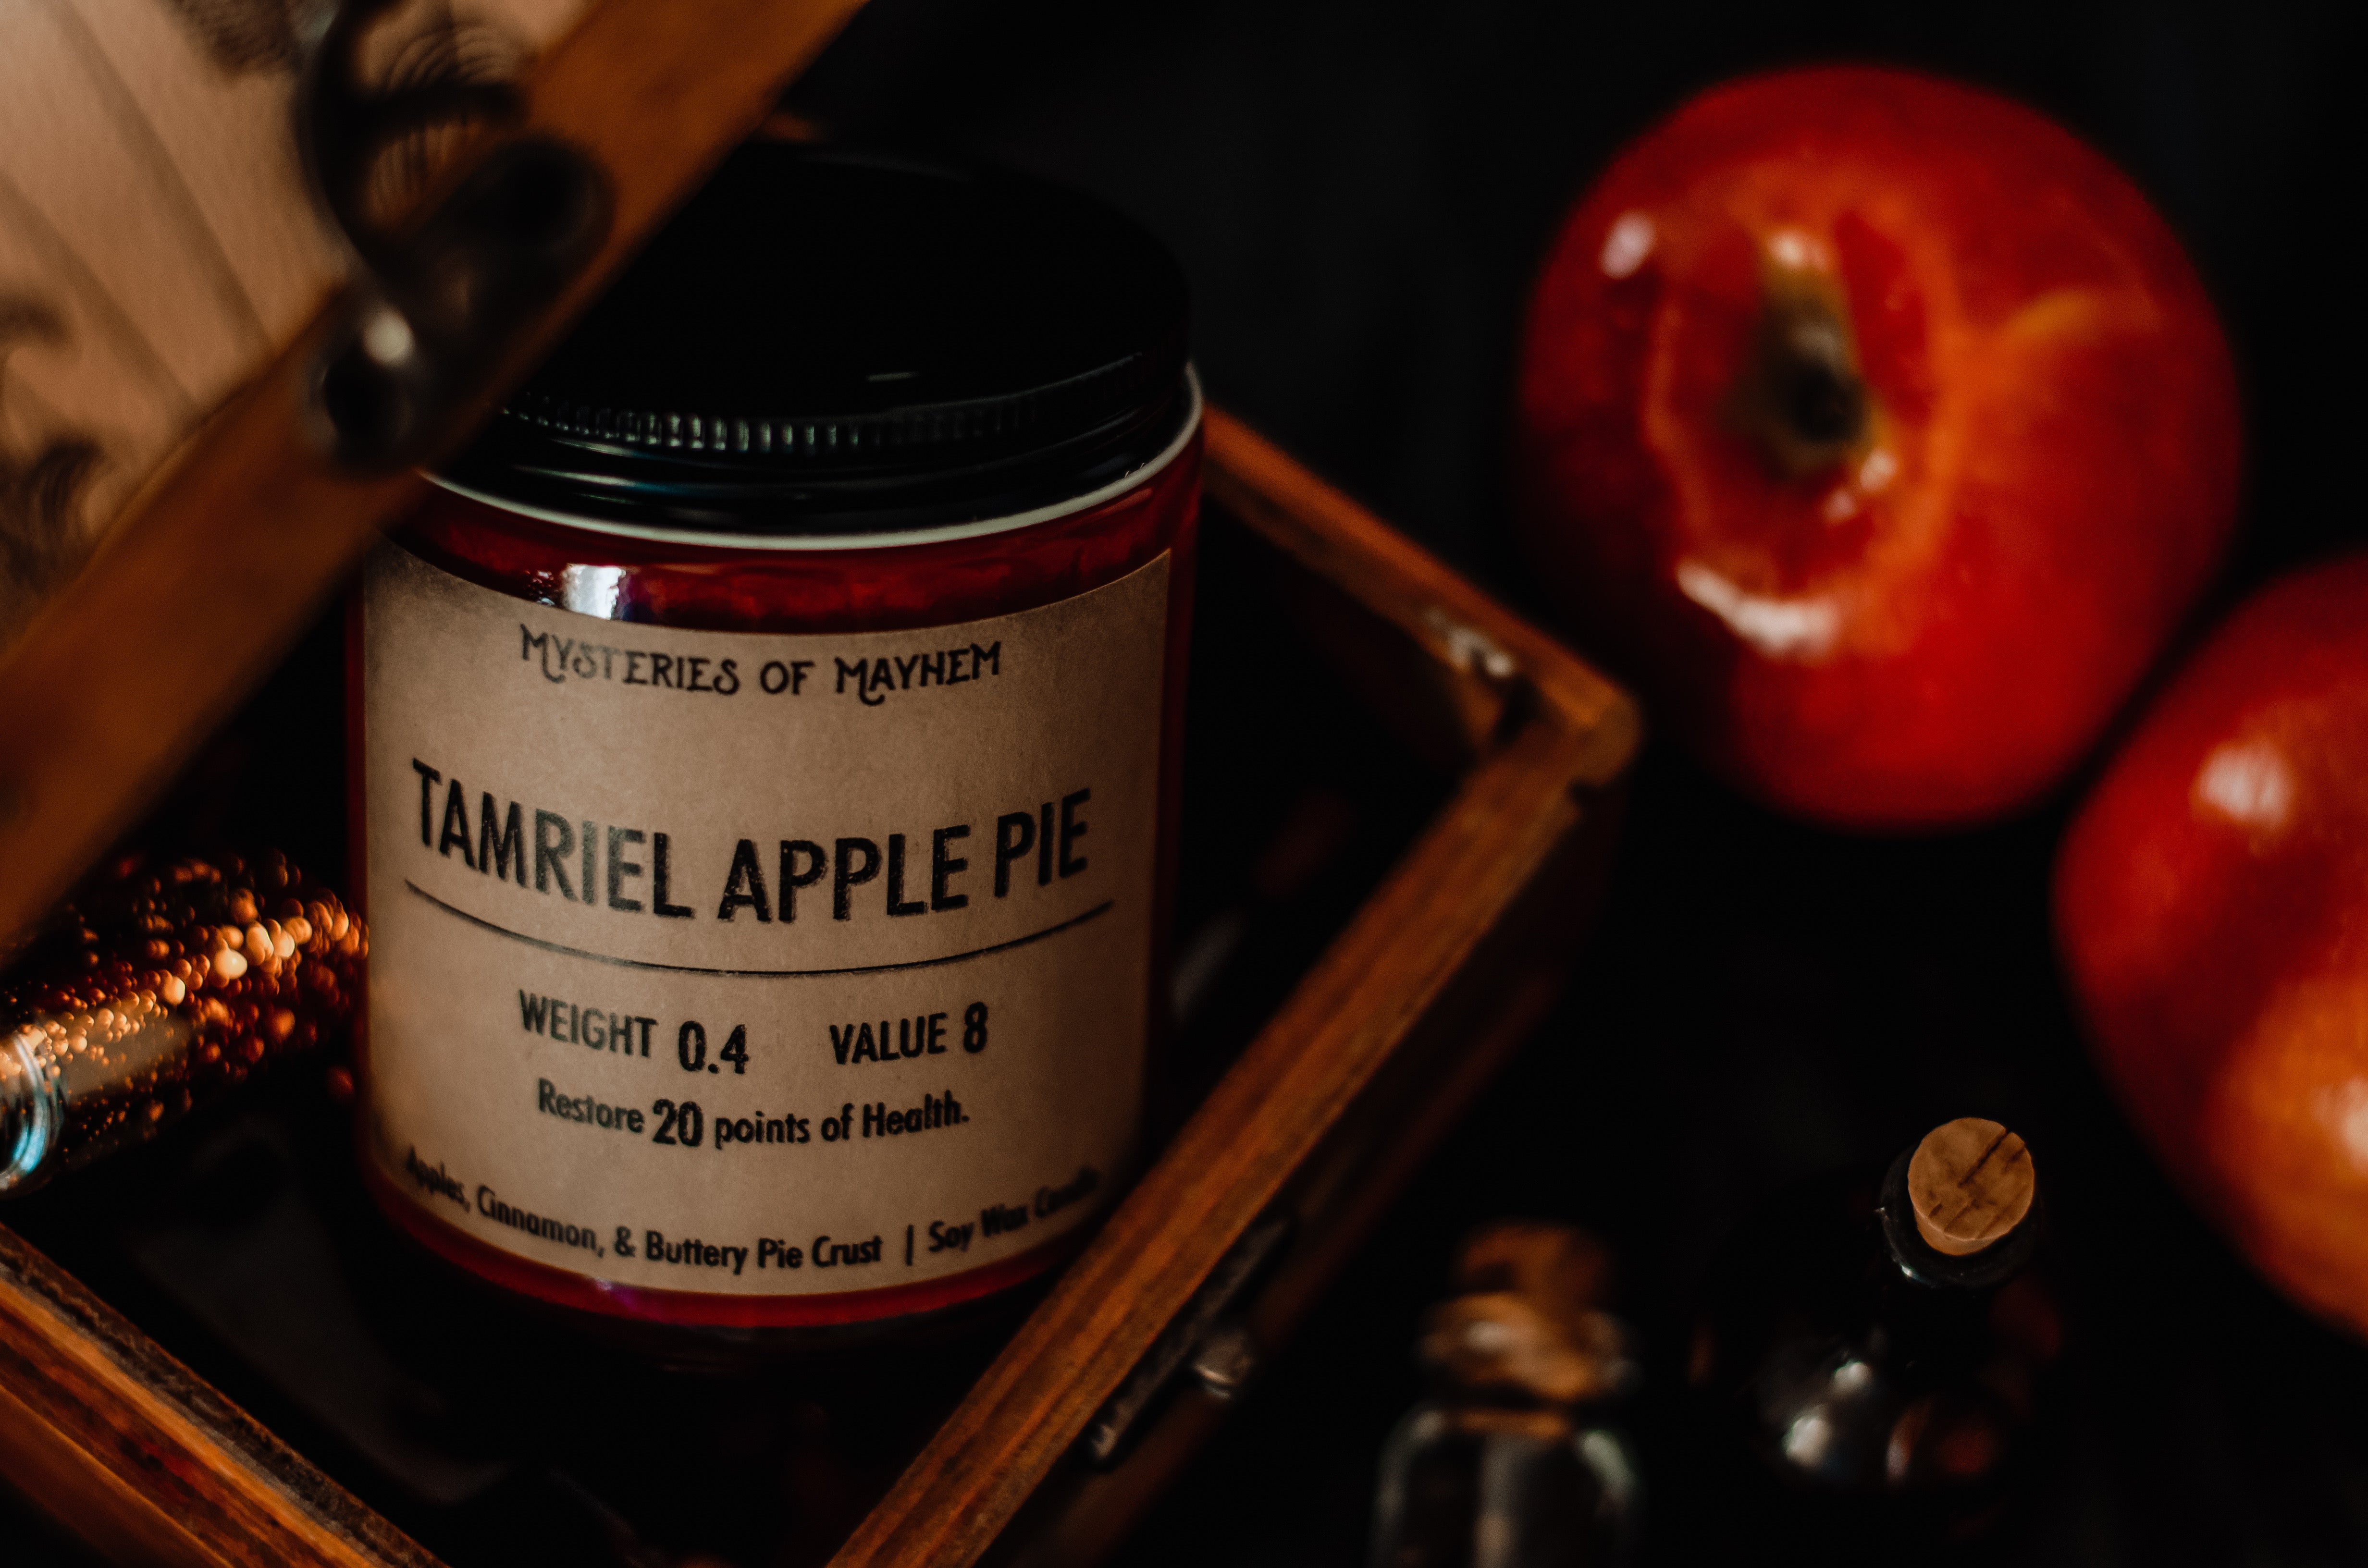 Tamriel Apple Pie - Apples, Cinnamon, and Buttery Pie Crust Scented